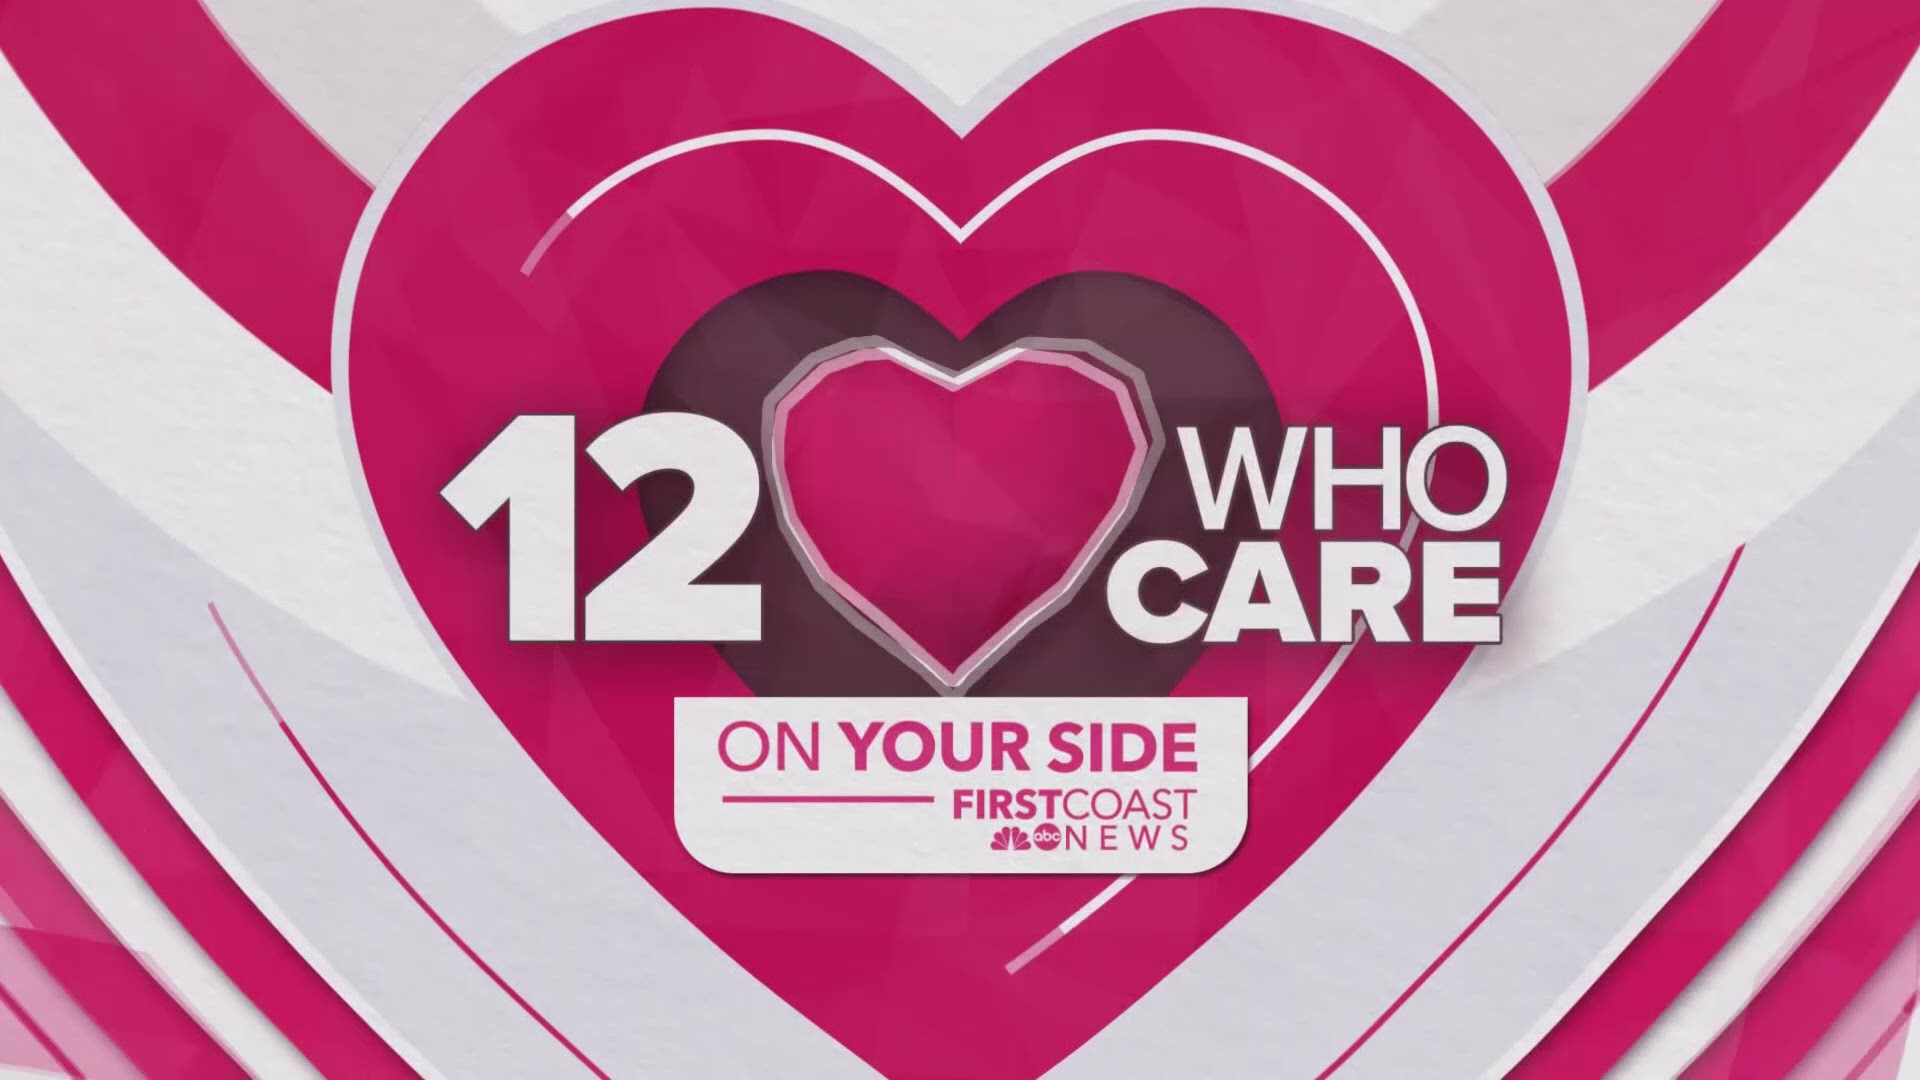 First Coast News is proud to present the 12 Who Care Community Service Awards to honor our community's volunteers.